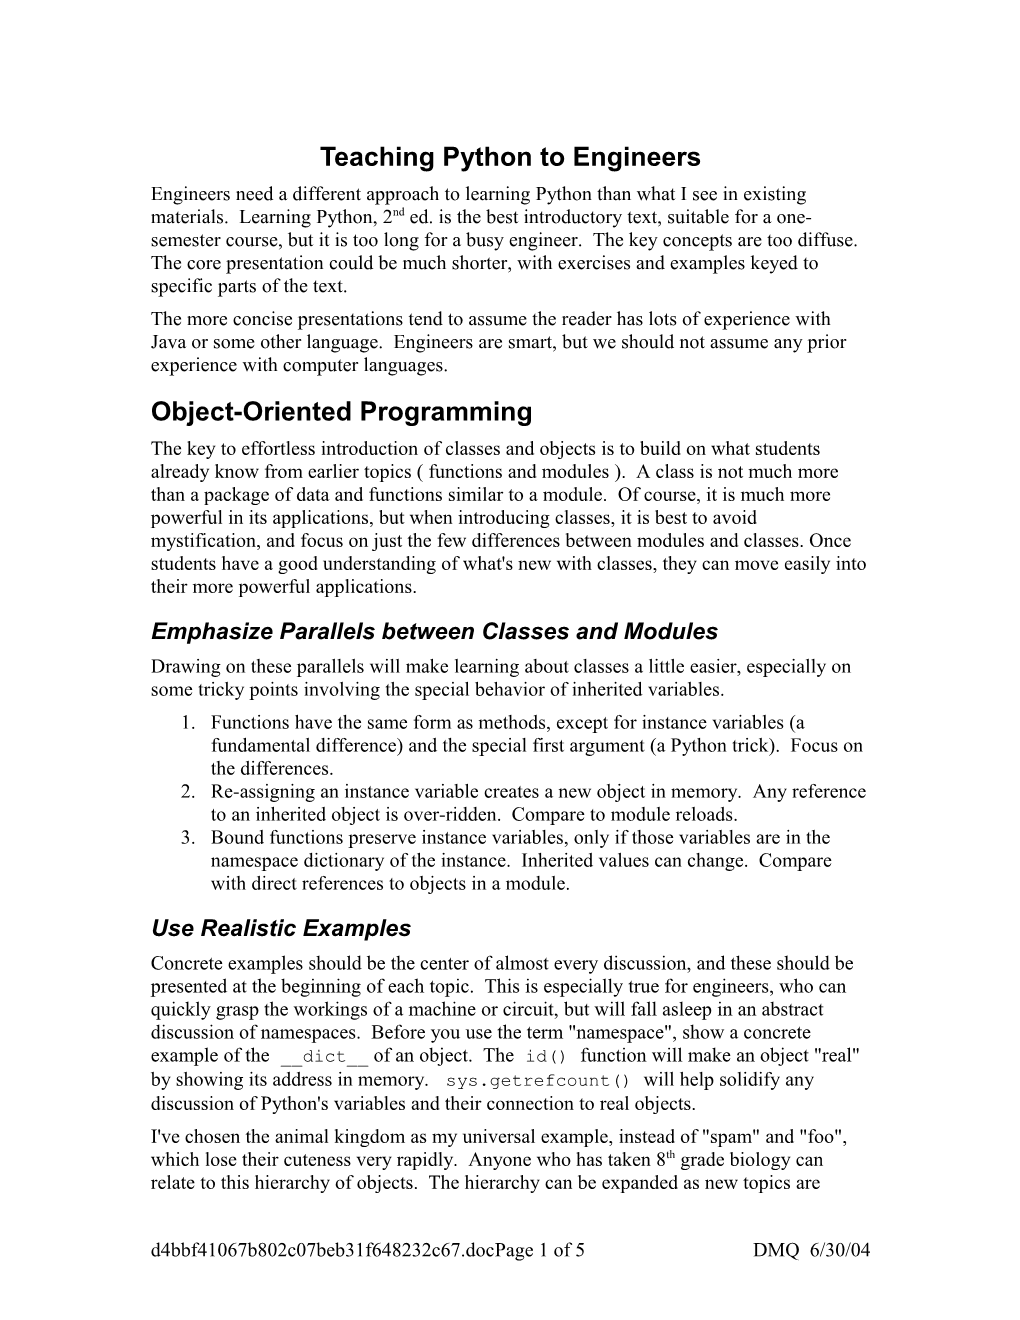 Teaching Notes for Object Oriented Programming